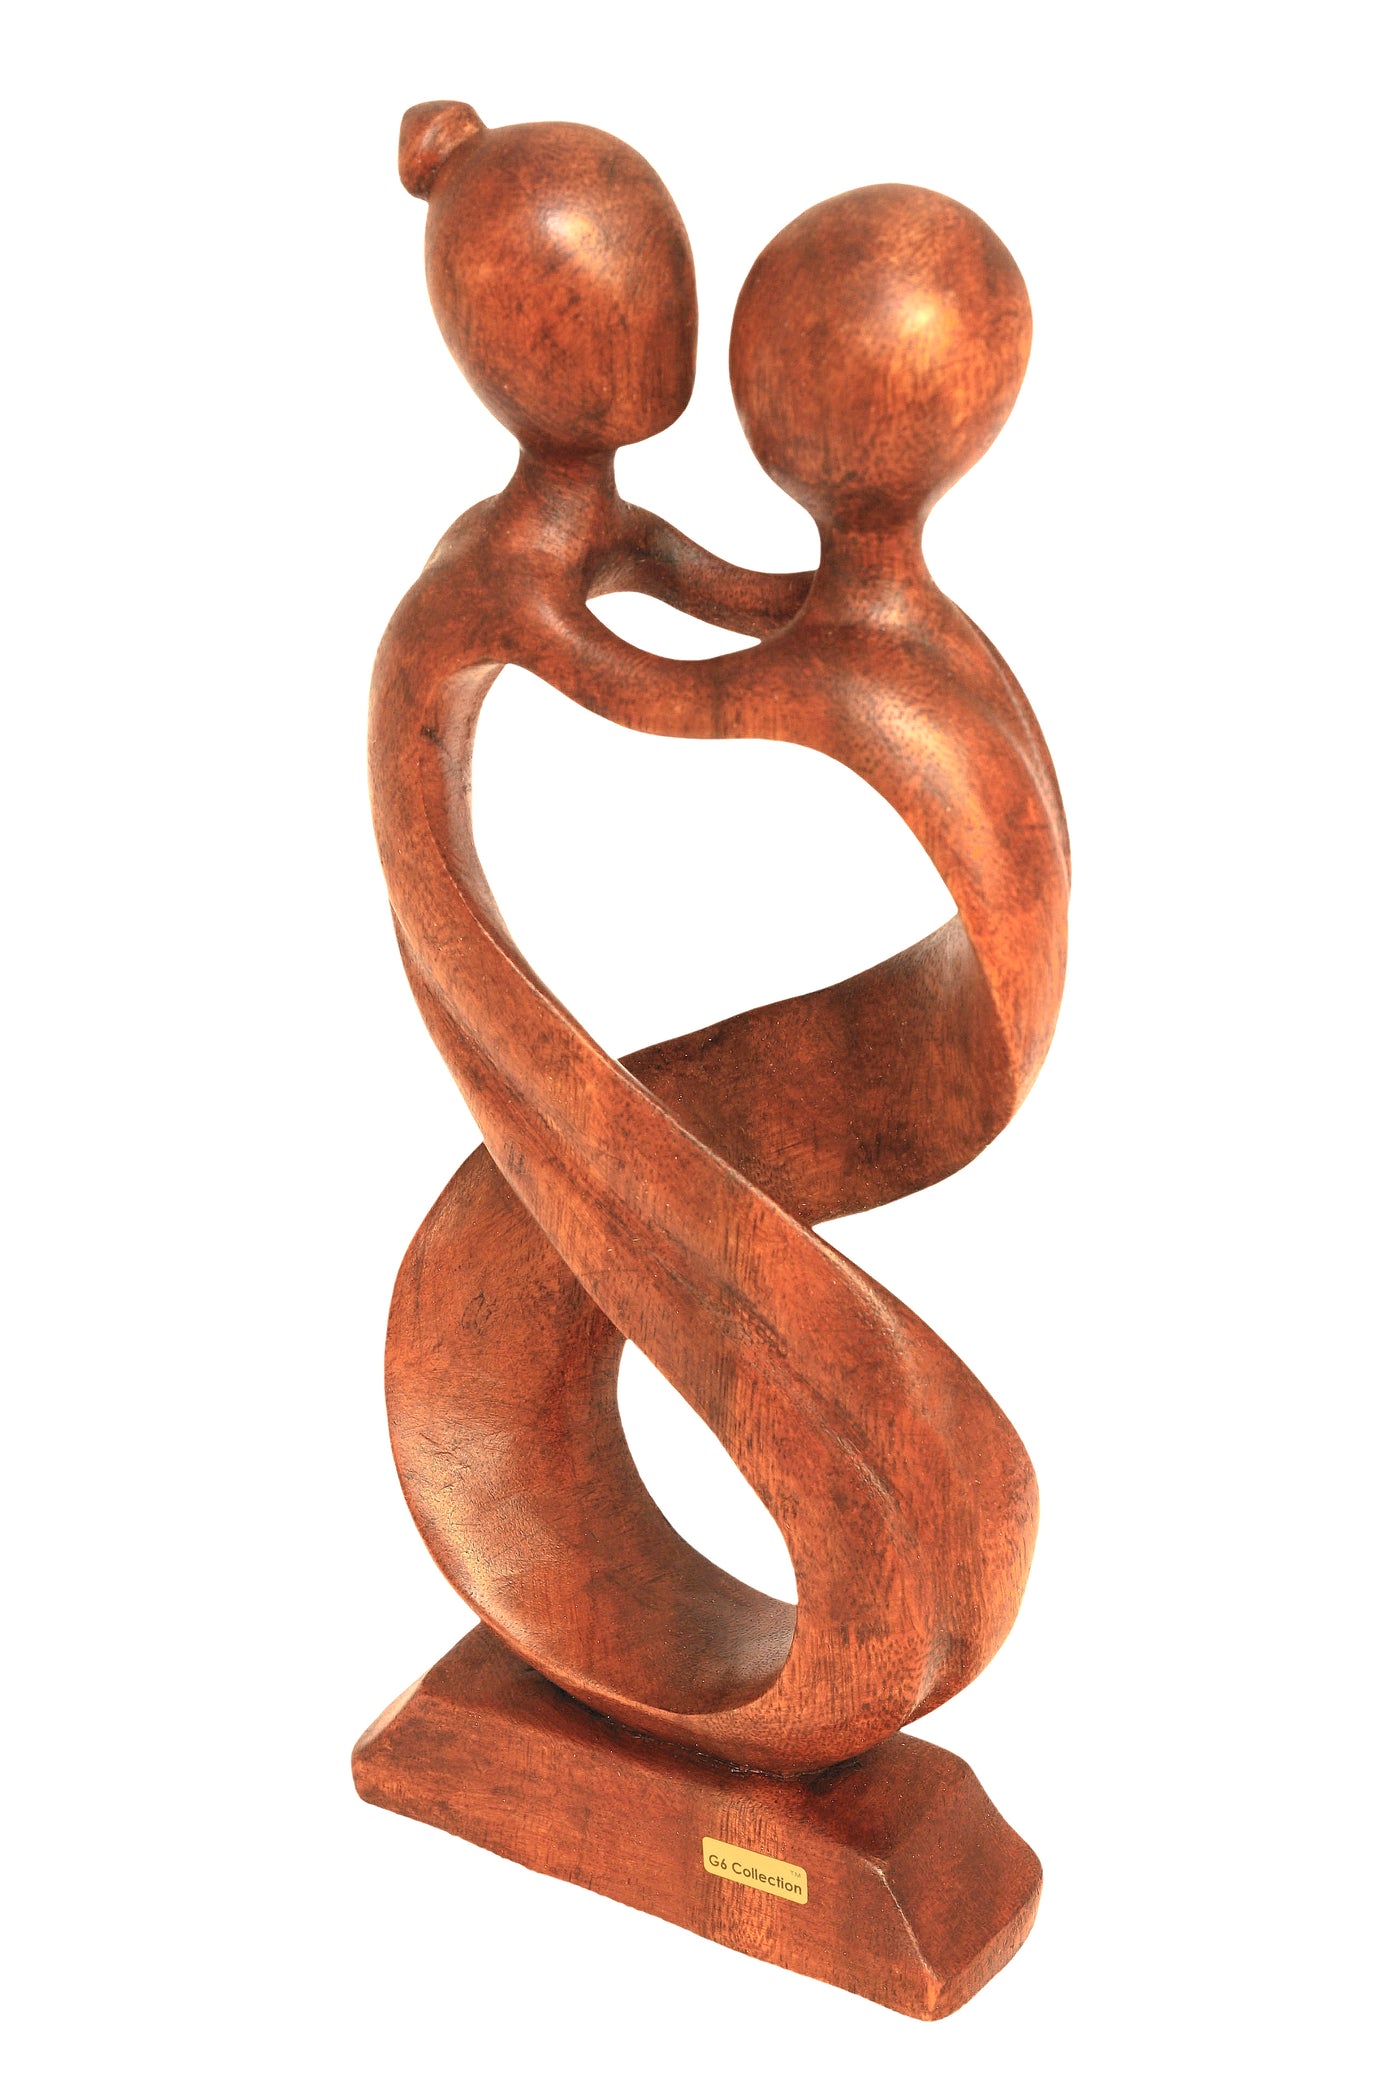 12" Wooden Handmade Abstract Sculpture Statue Handcrafted "Infinite Love" Gift Decorative Home Decor Figurine Accent Decoration Artwork Hand Carved